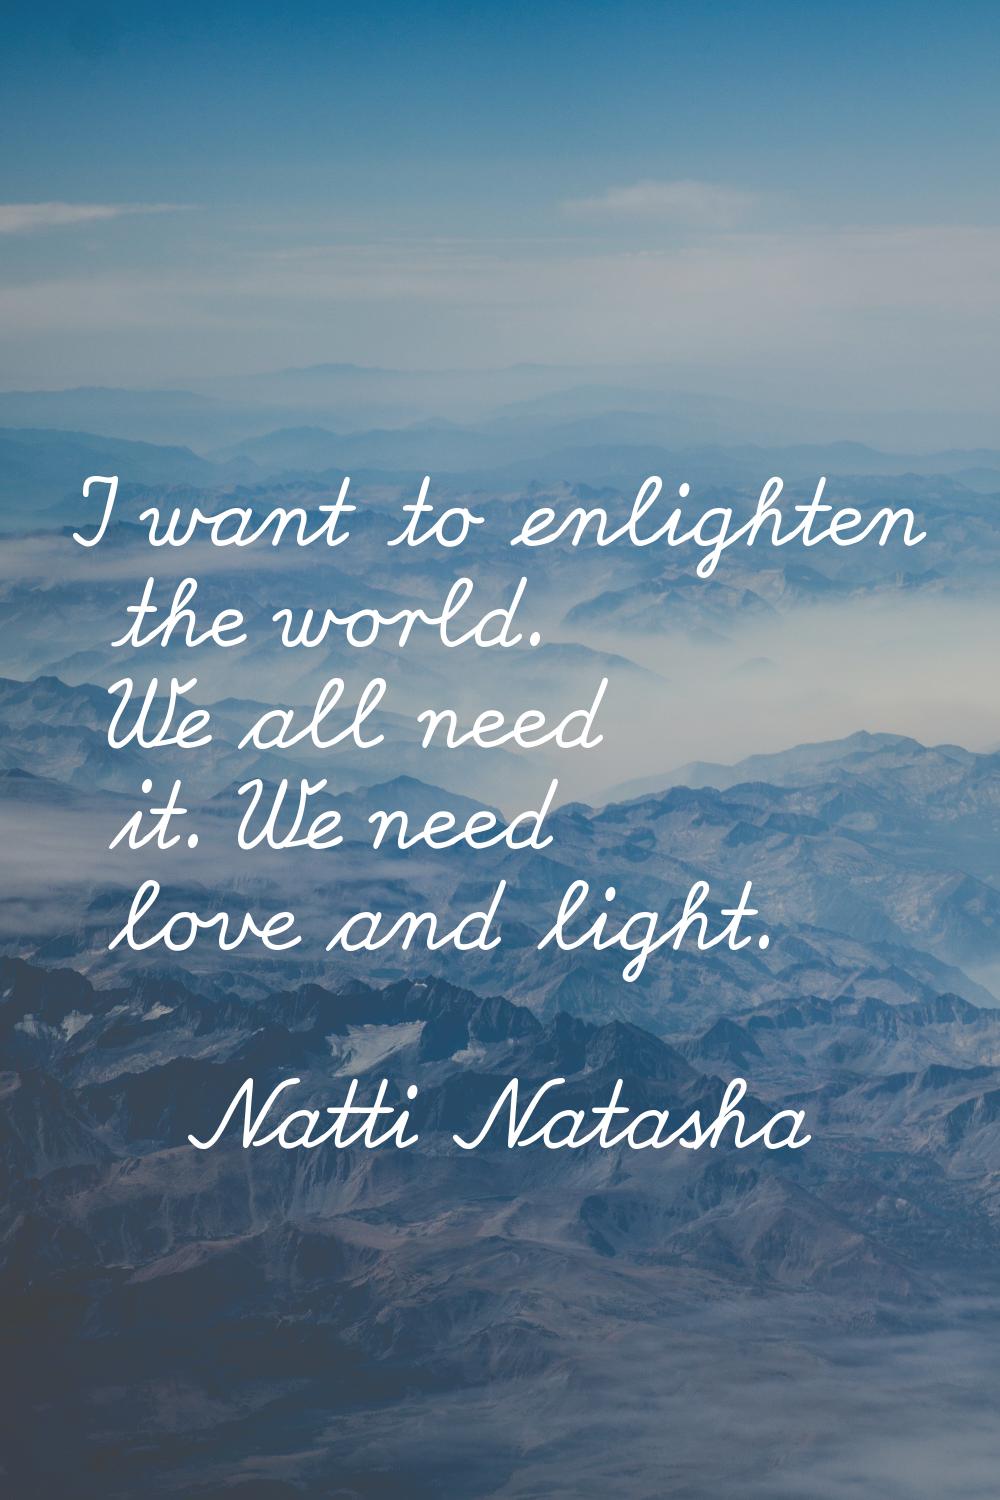 I want to enlighten the world. We all need it. We need love and light.